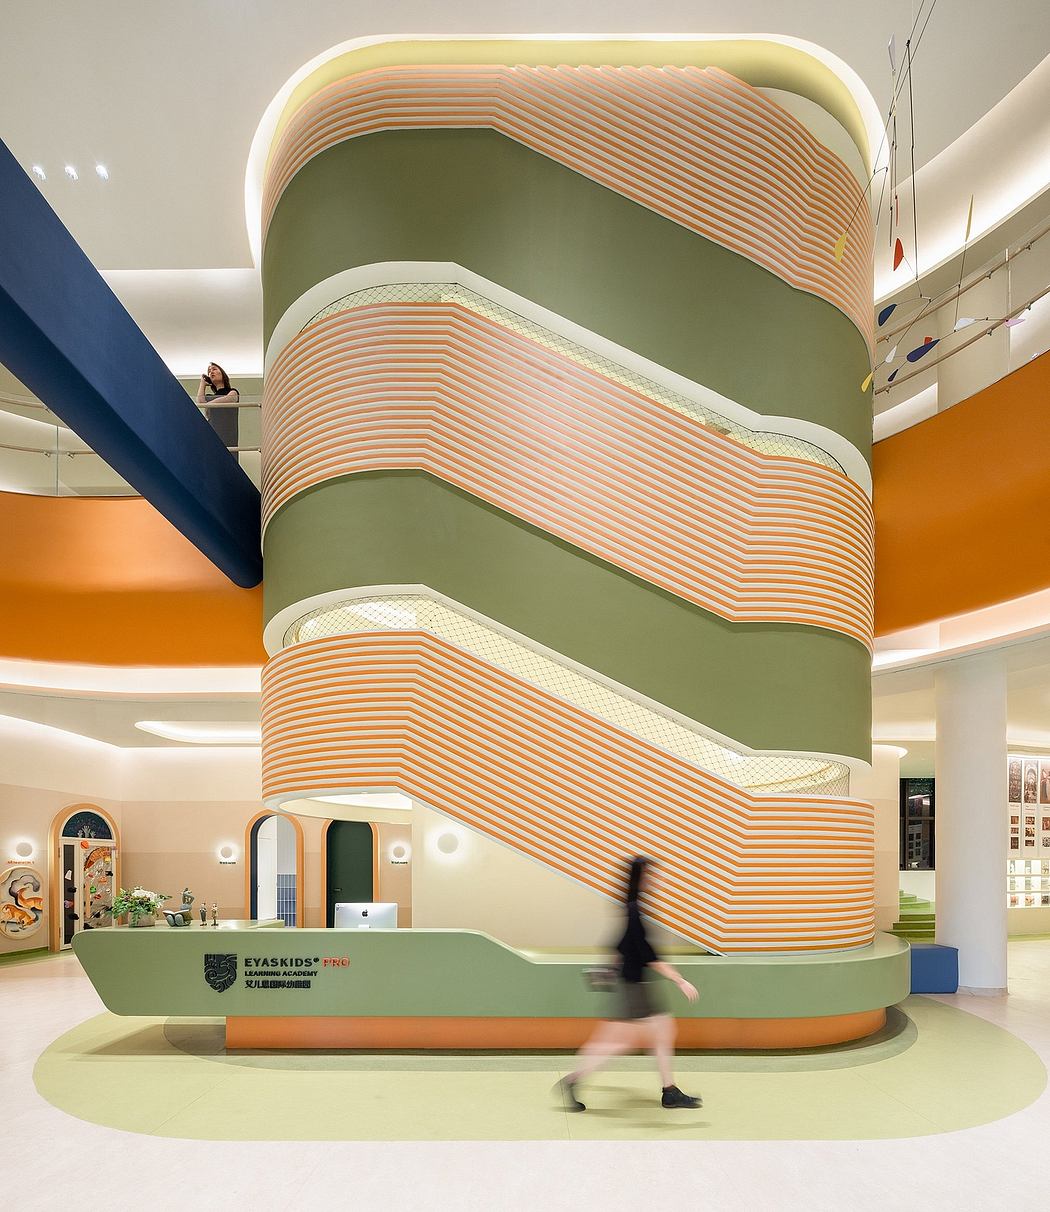 Vibrant, undulating architectural forms in warm hues create a dynamic, playful interior space.